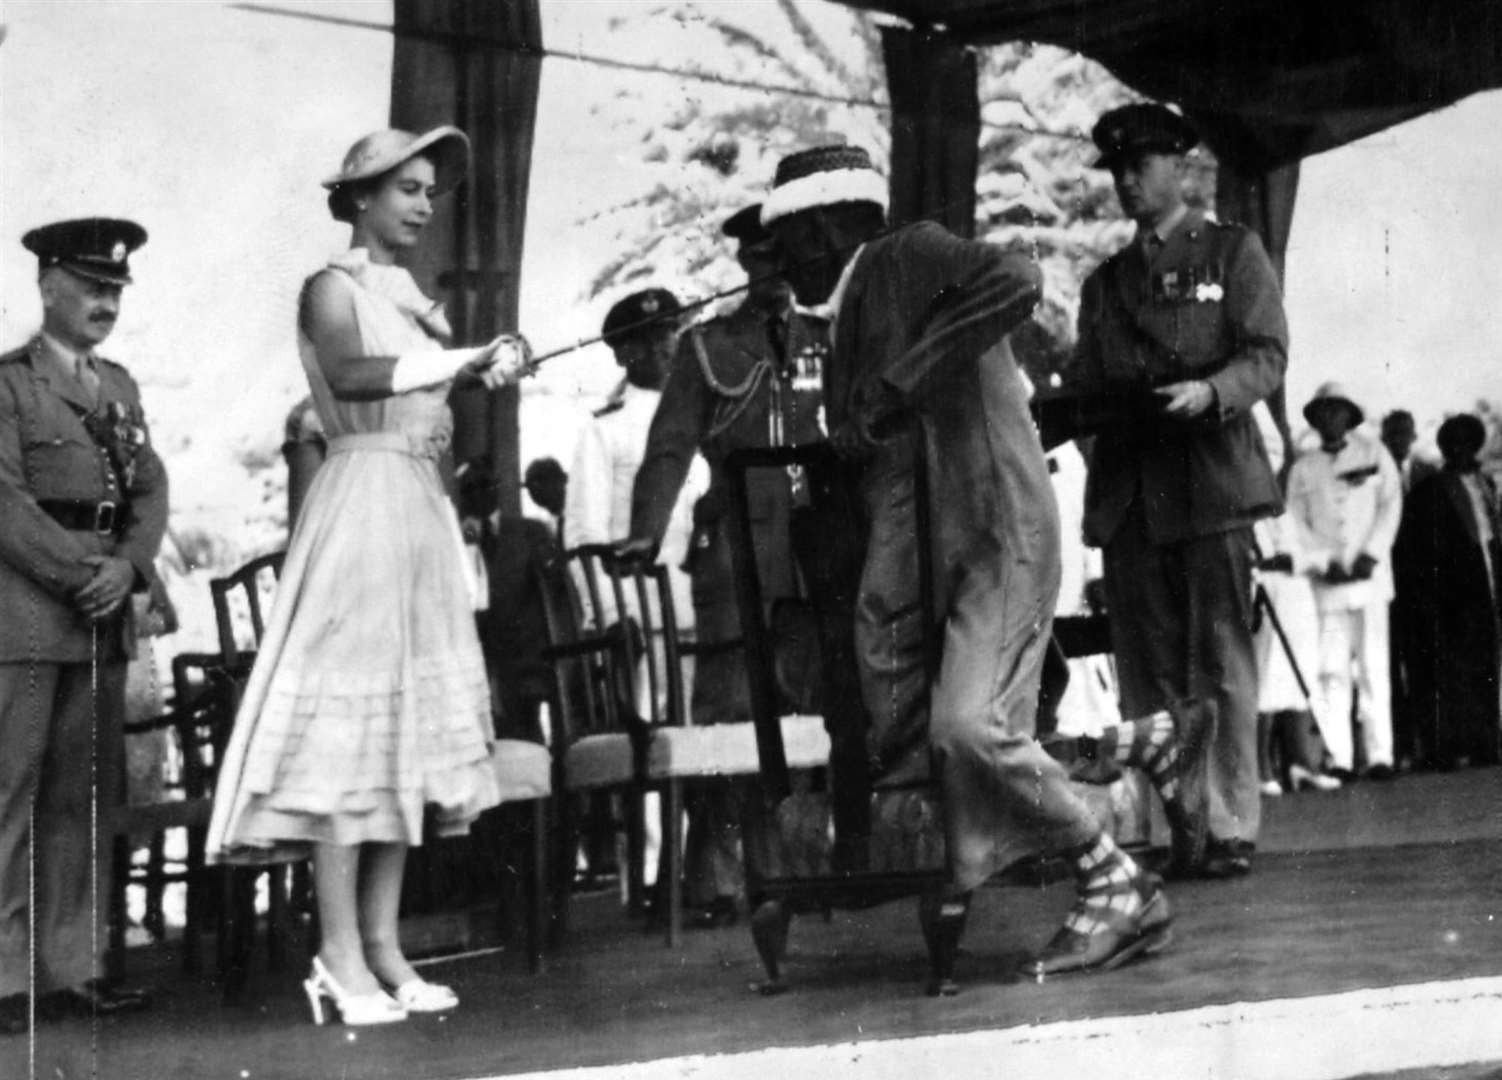 The Queen bestowing a knighthood on Seiyid Bubakr Bin Sheikh Al Kaf, Councillor of the Kathiri State in Eastern Aden, at an open-air investiture in 1954 (PA)